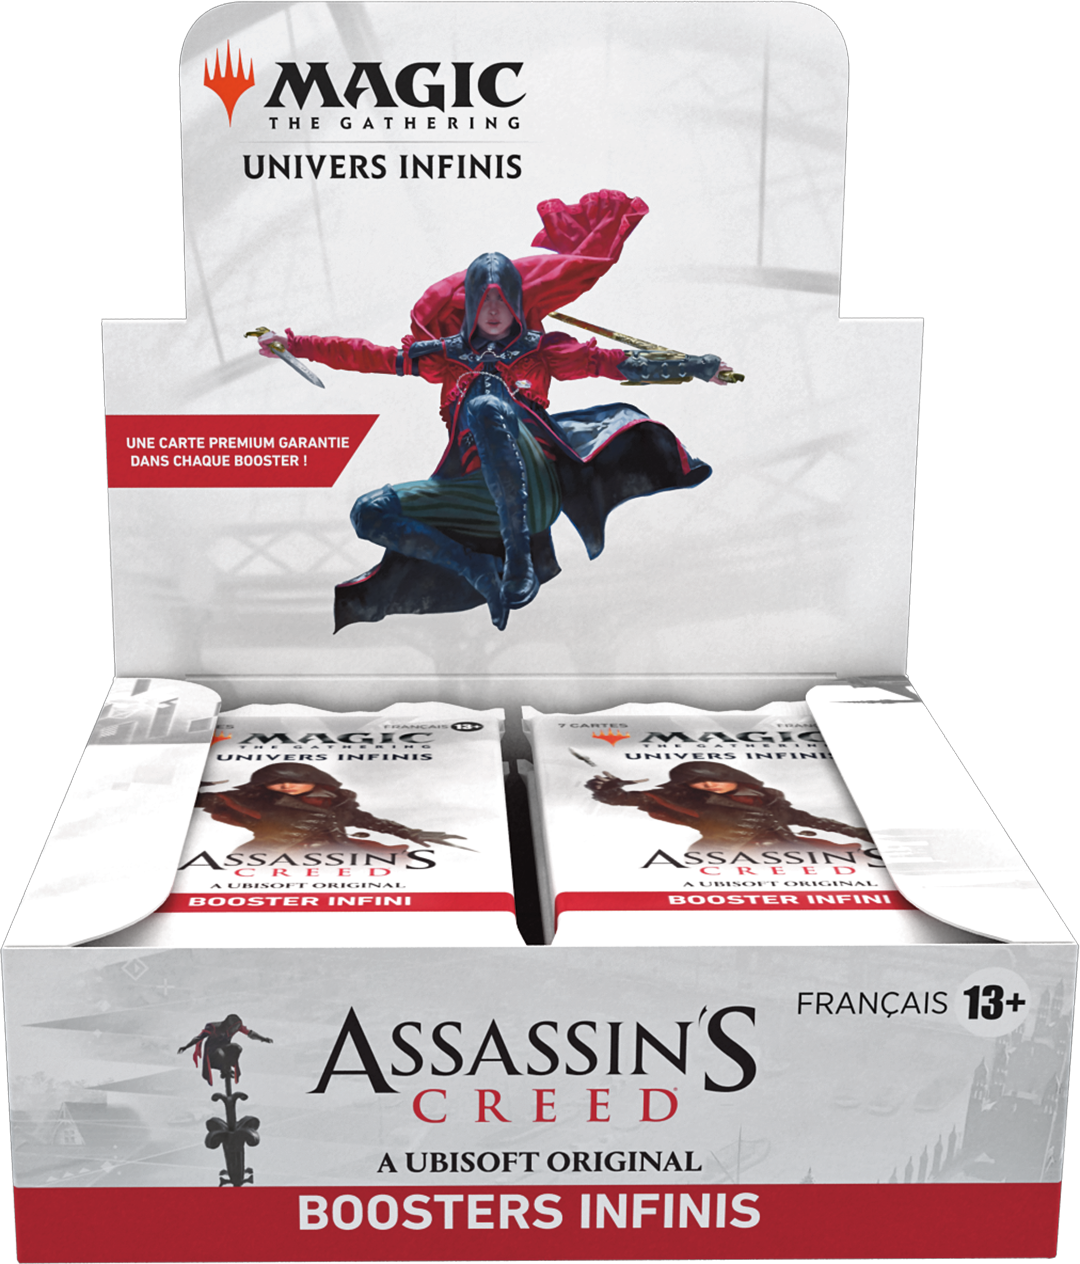 Boîte de boosters infinis Magic: The Gathering – Assassin's Creed®